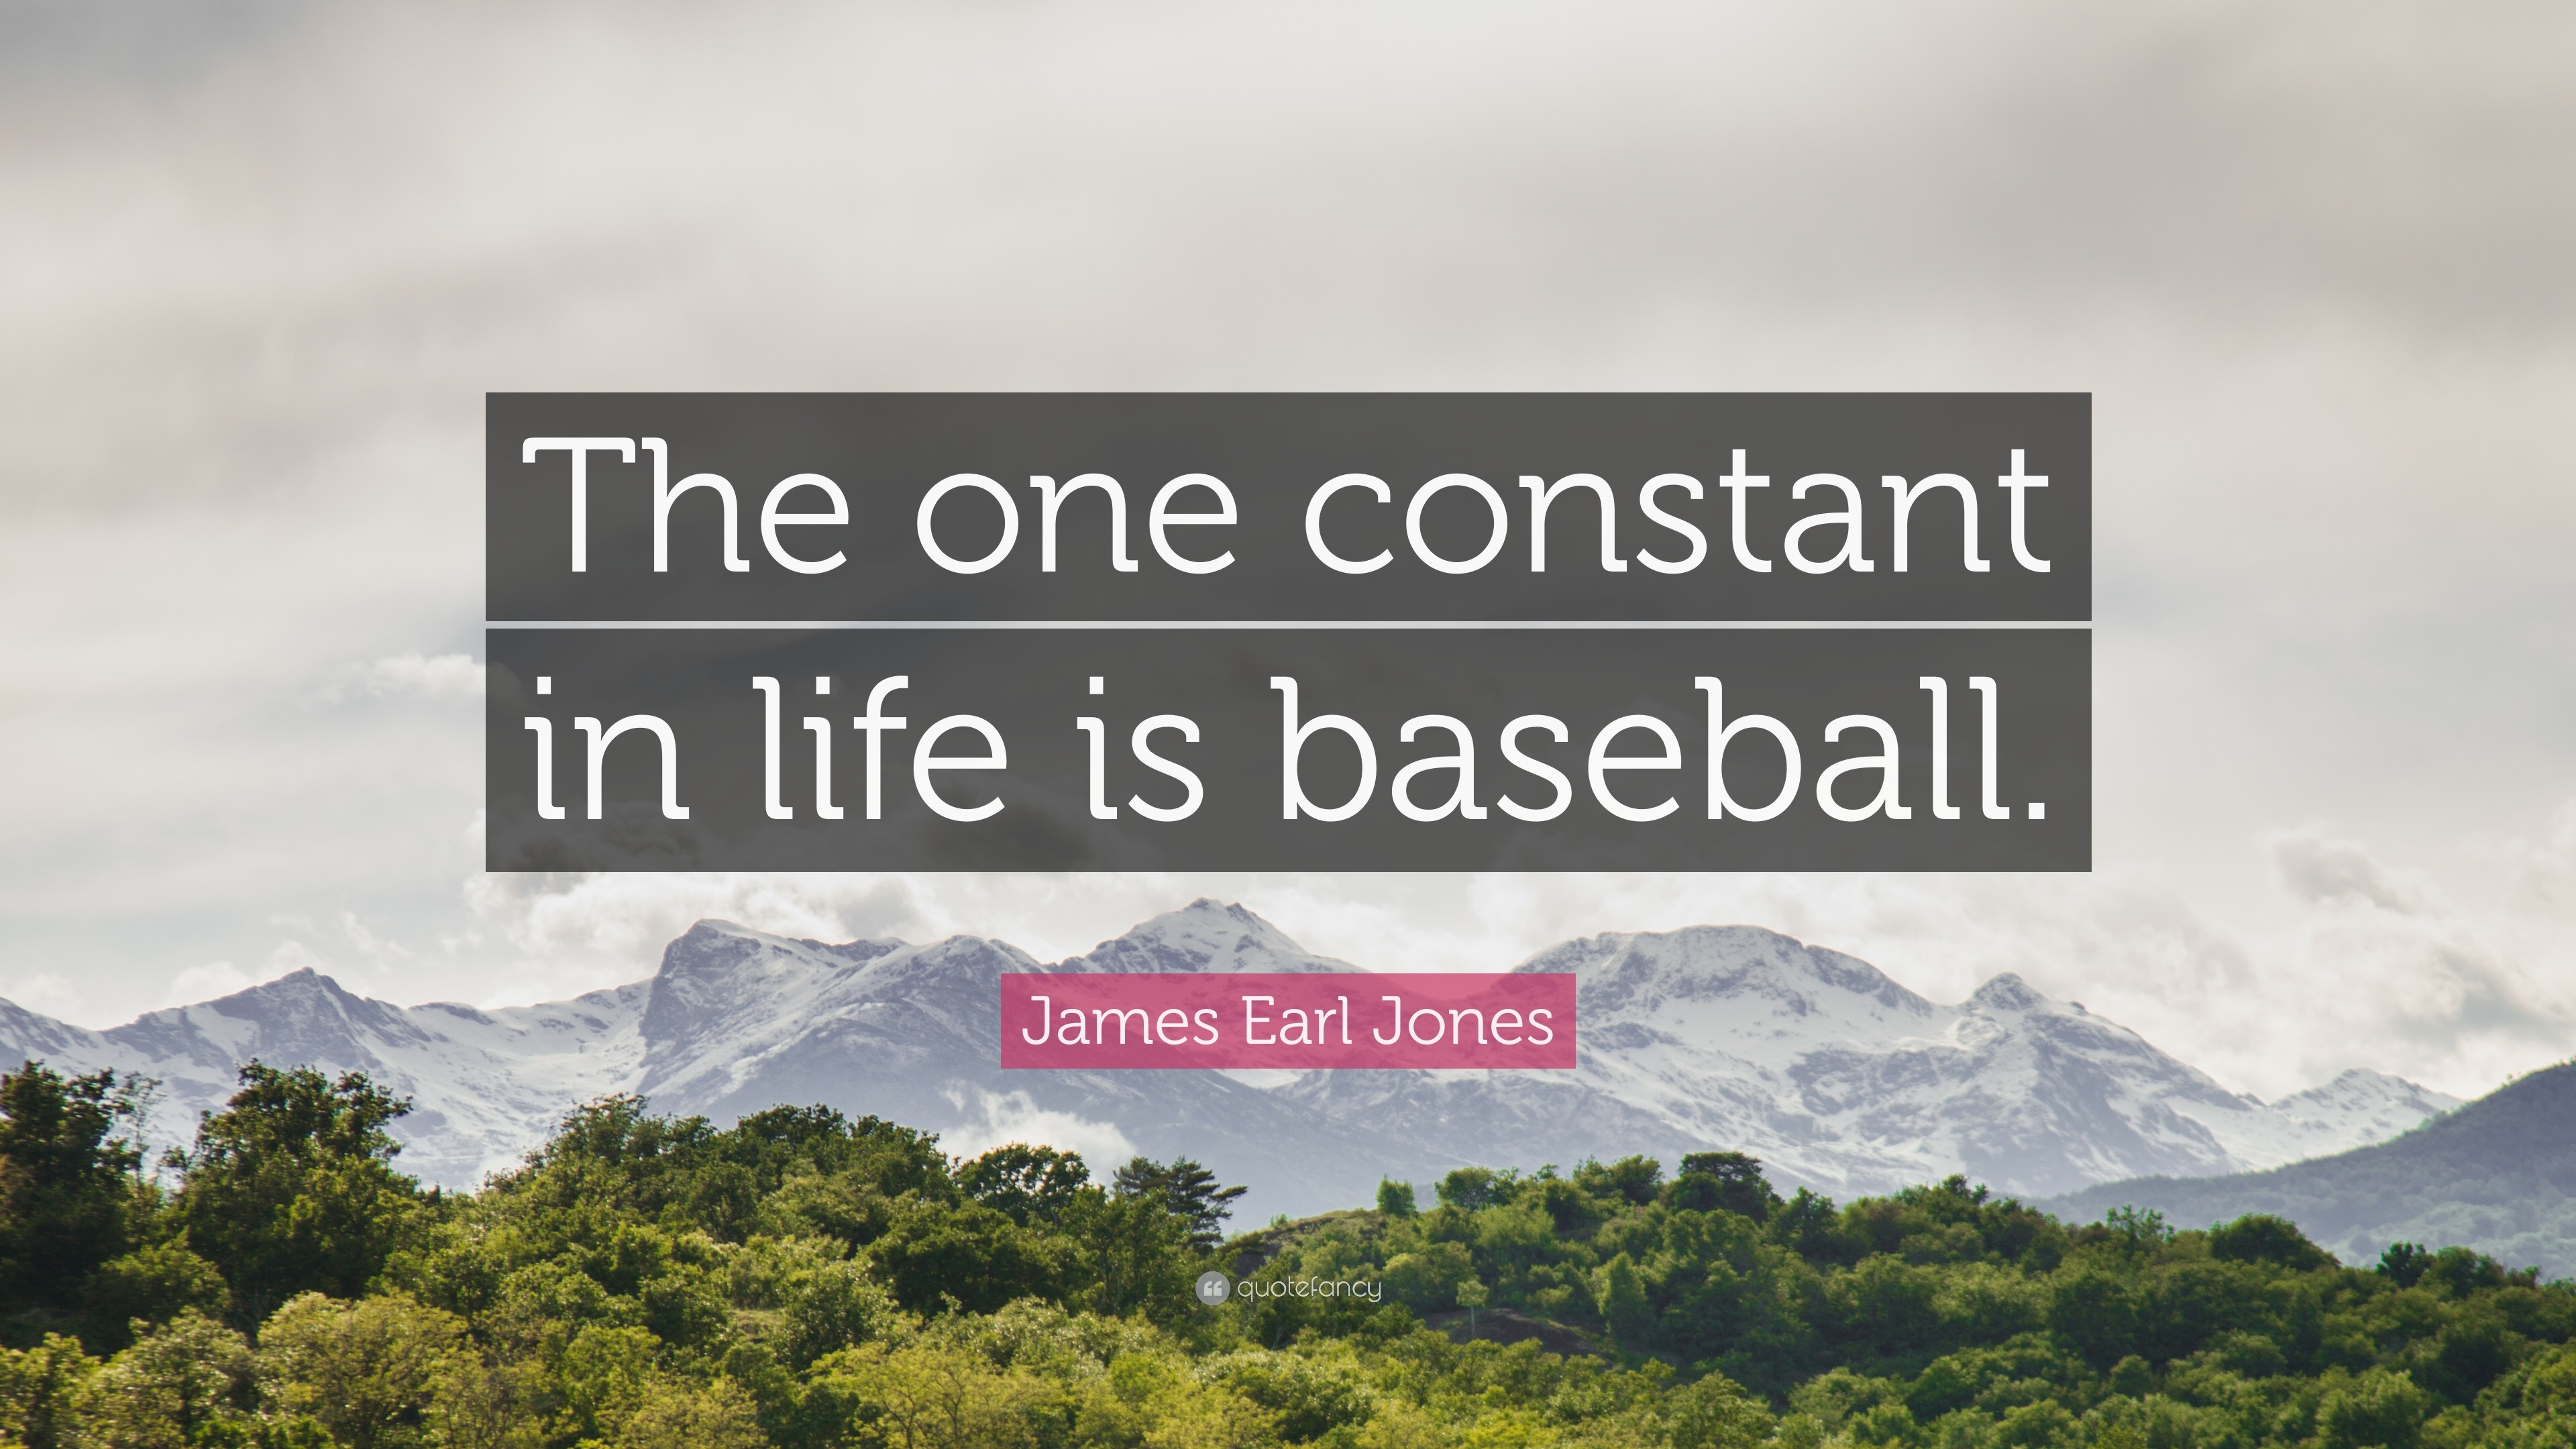 James Earl Jones quote: The one constant through all the years has been  baseball